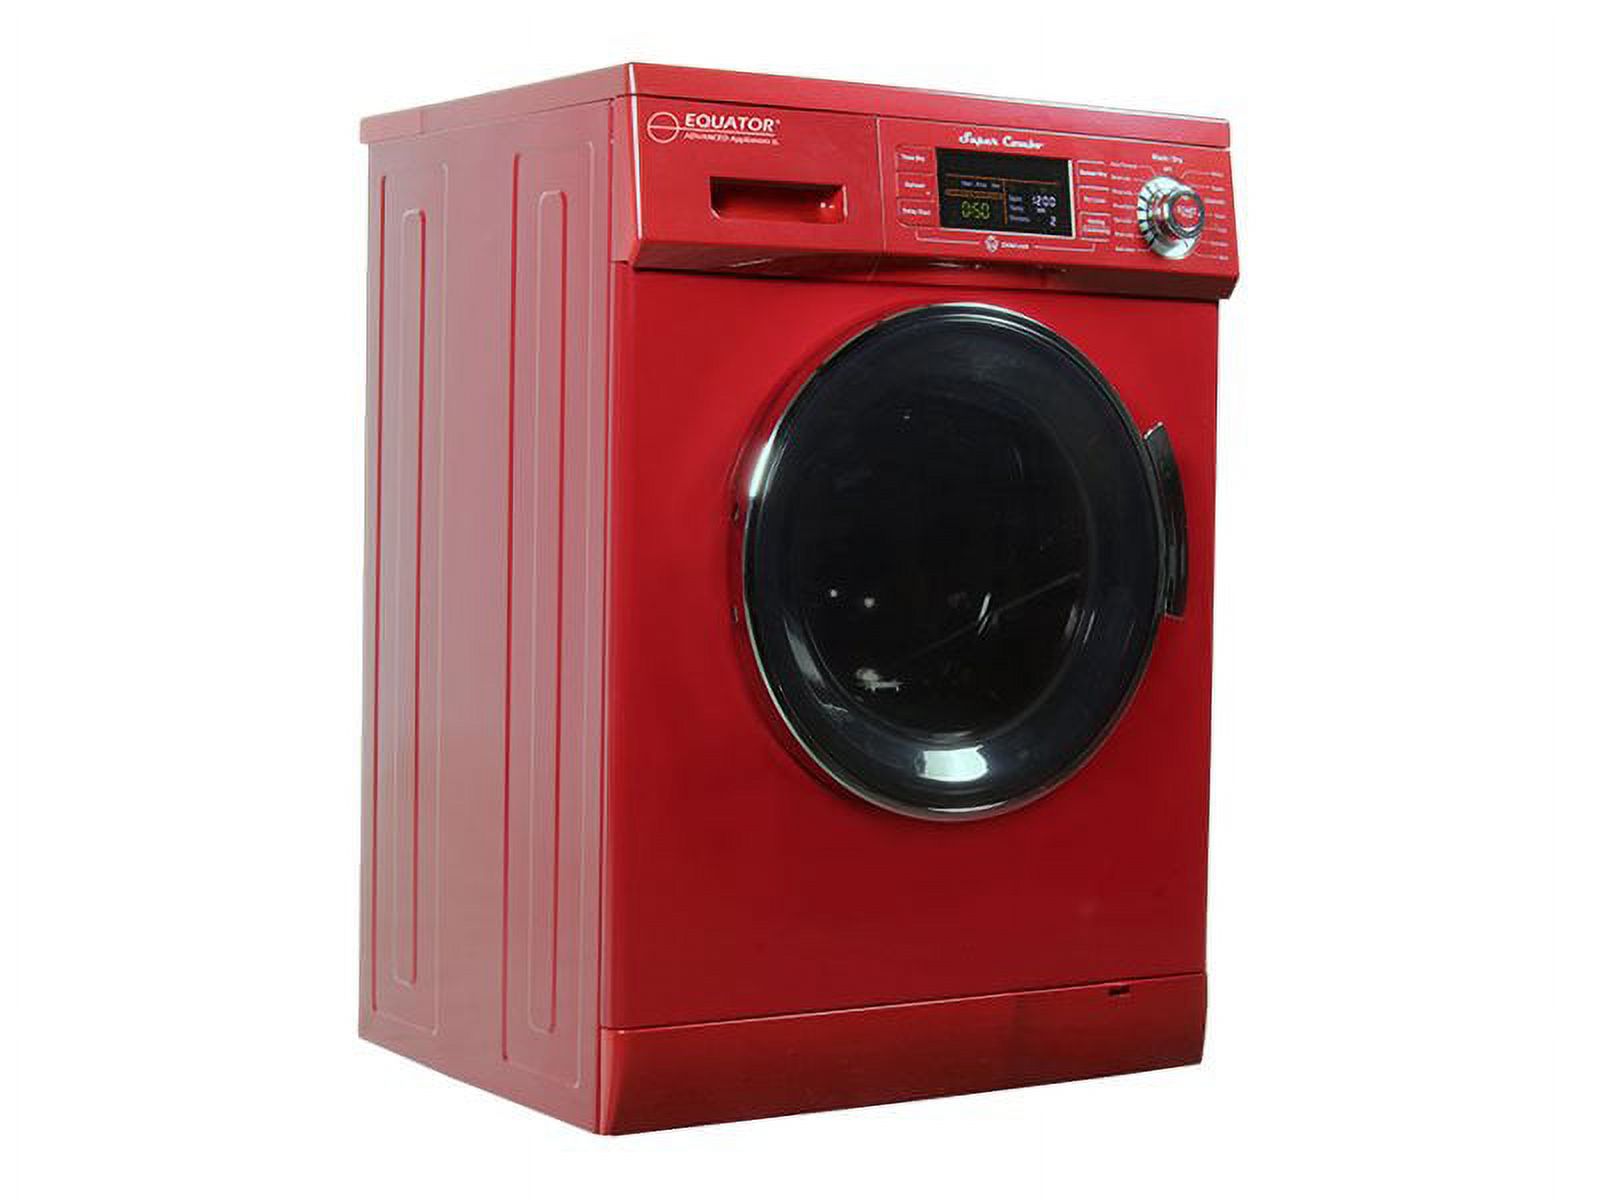 Equator All-in-one 13 lb Compact Combo Washer Dryer, Red - image 4 of 6